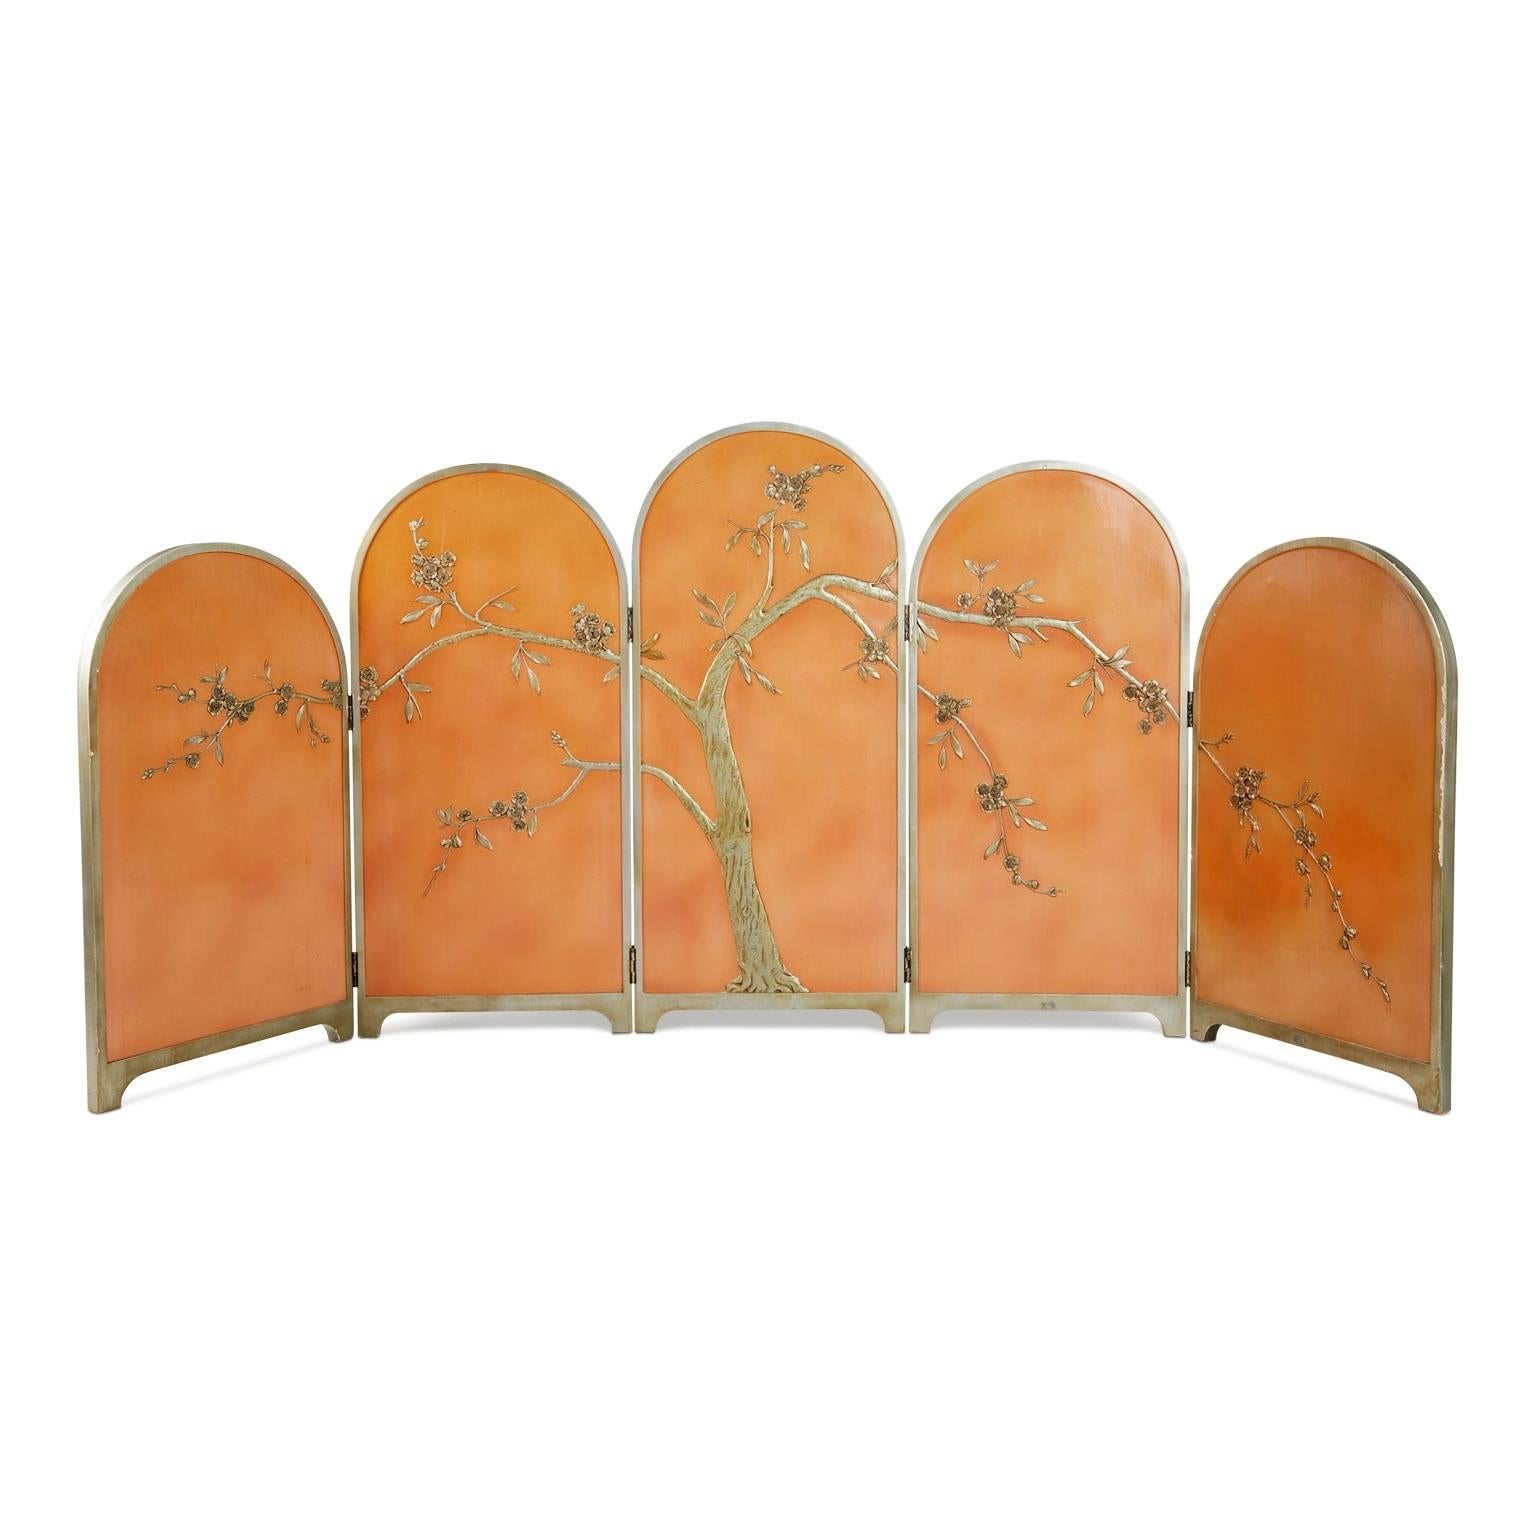 Exquisitely beautiful Art Deco chinoiserie wood folding screen with deep floral reliefs, circa 1920. This elegant room divider features a delicately carved relief blossoming tree with slender leaves and a subtly twisting trunk with a knot. The